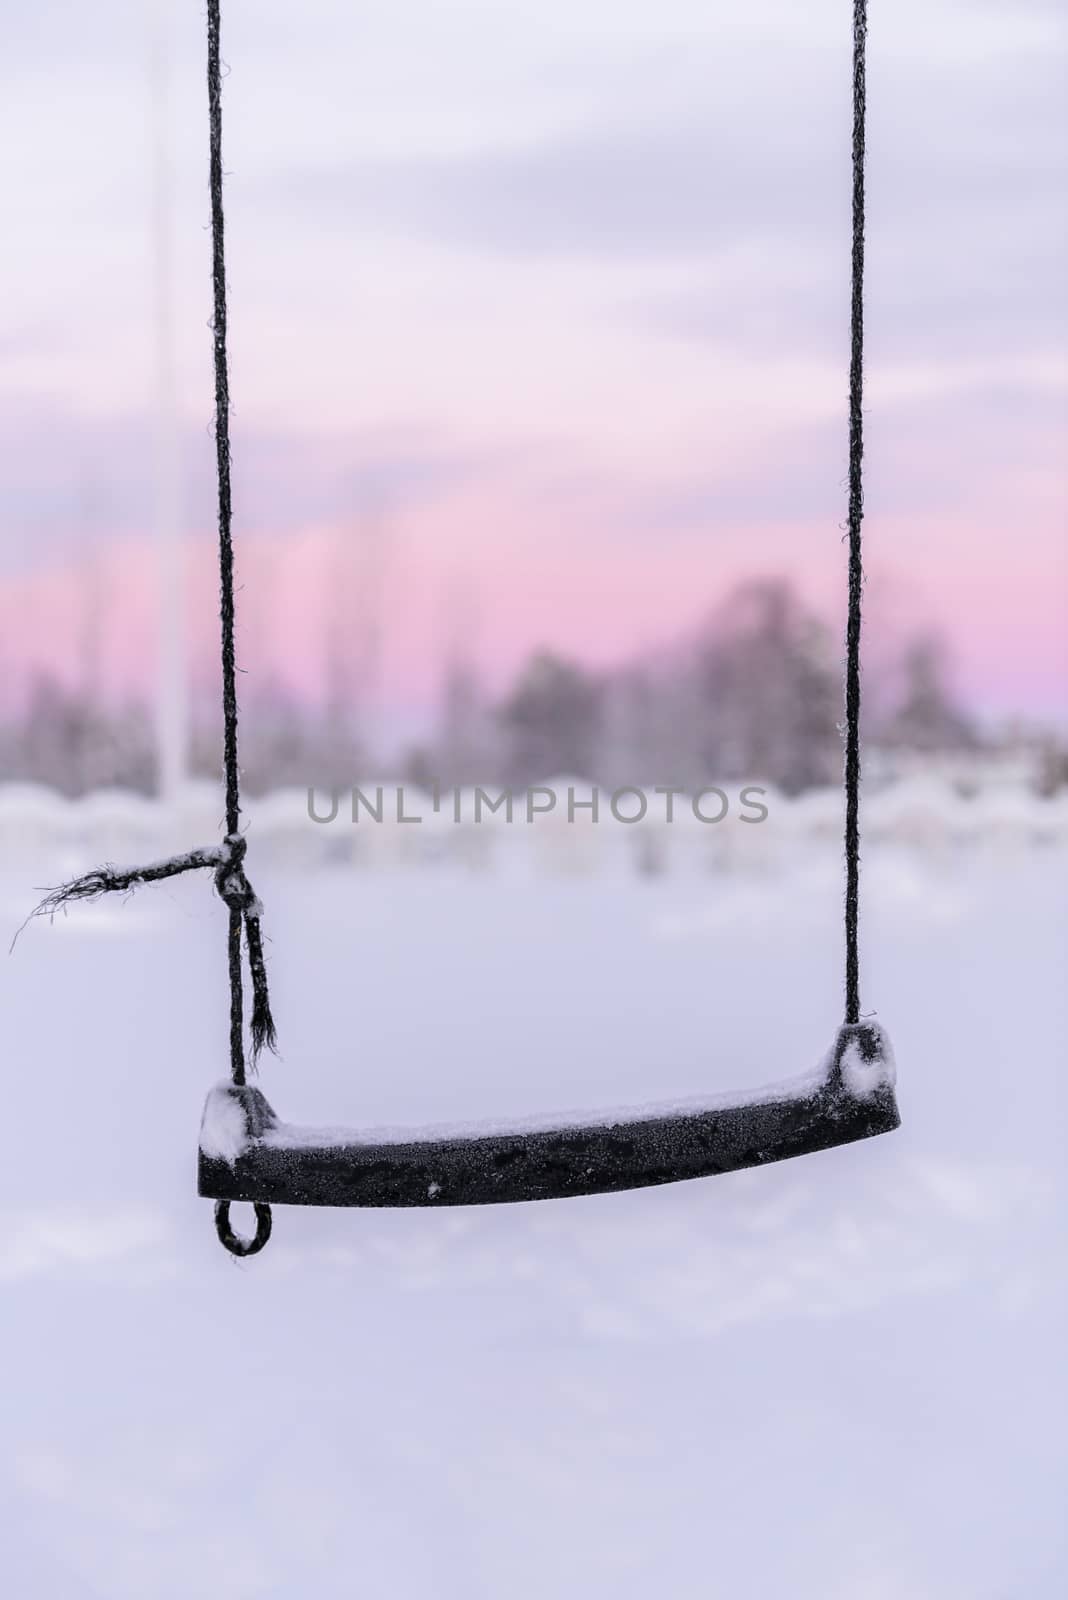 The swing has covered with heavy snow and sunset time in winter  by animagesdesign